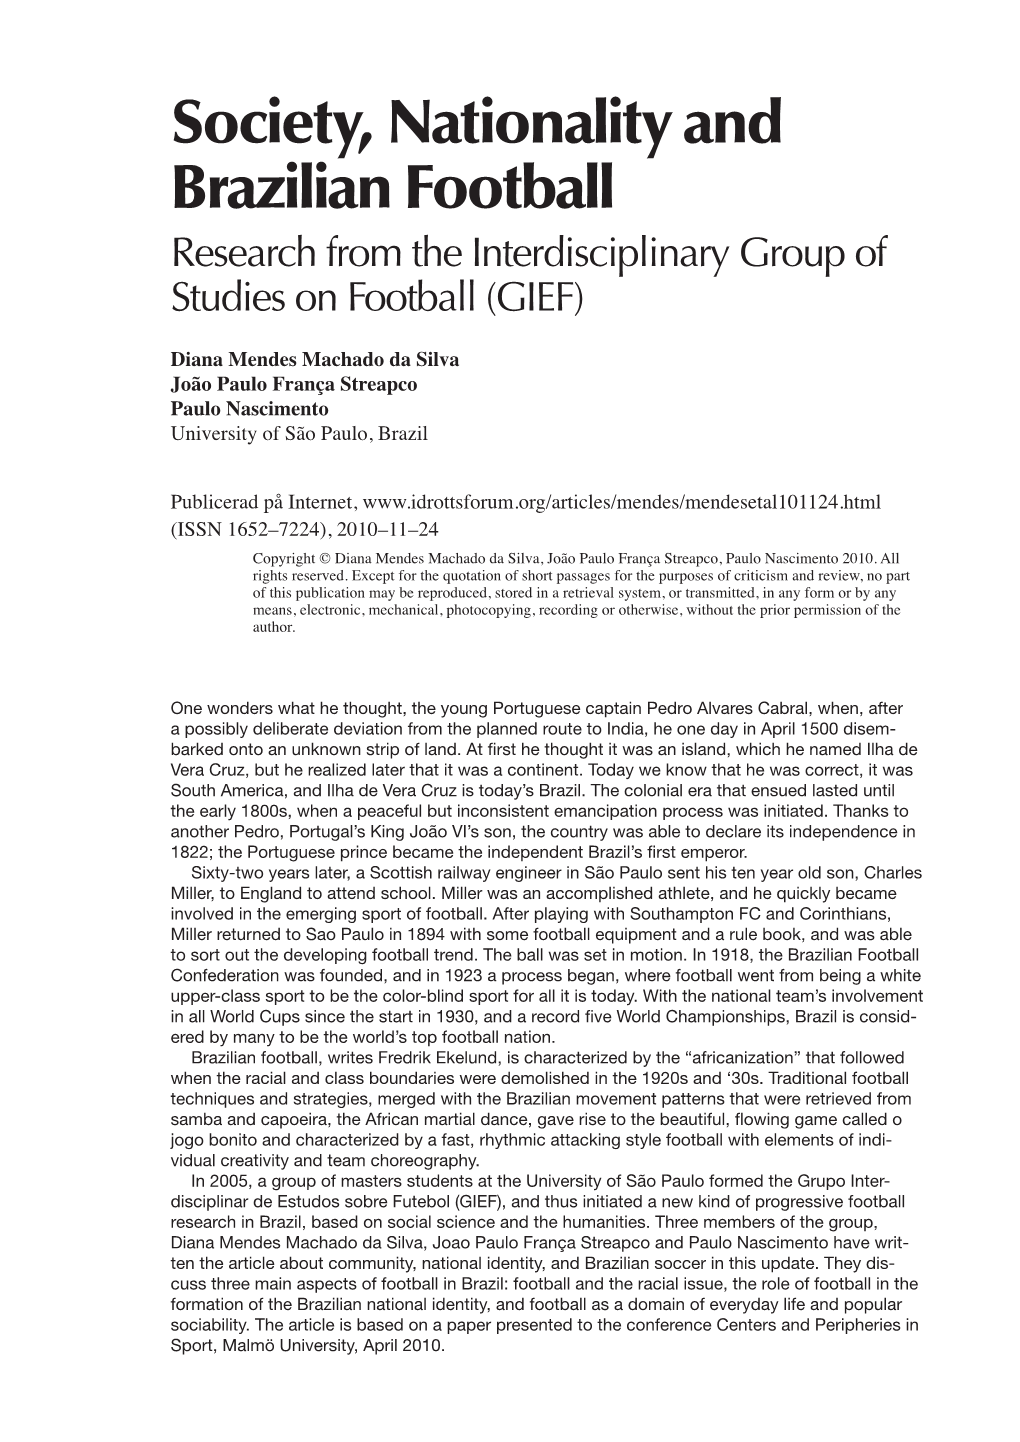 Society, Nationality and Brazilian Football Research from the Interdisciplinary Group of Studies on Football (GIEF)